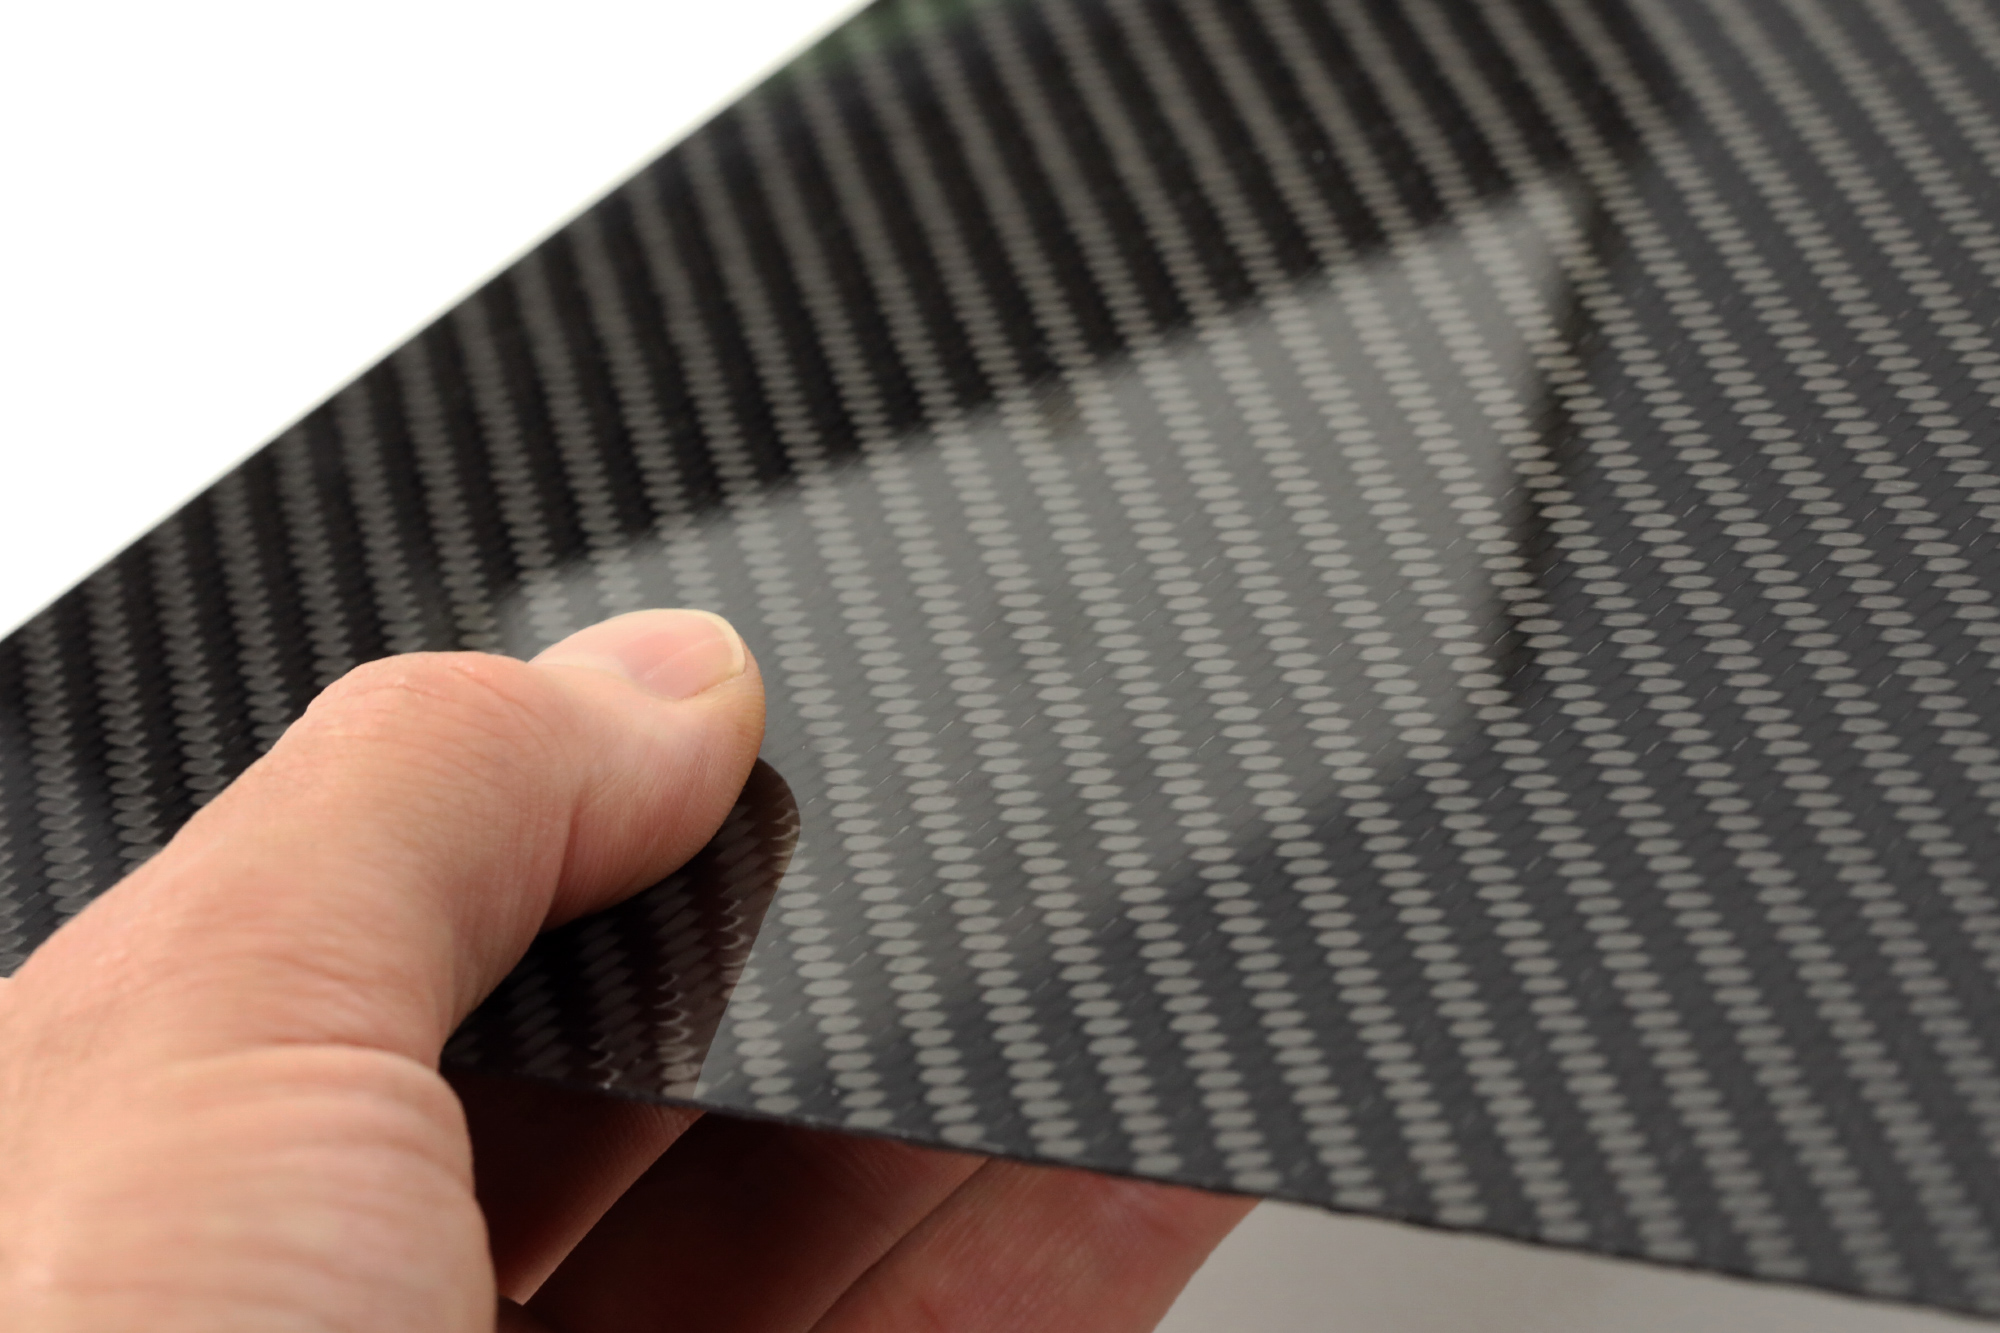 Newmind 3X 125mm X 75mm 3K Carbon Fiber Plate Panel Sheets 0.5mm/1mm/2mm/3mm Thickness Composite Hardness Material 